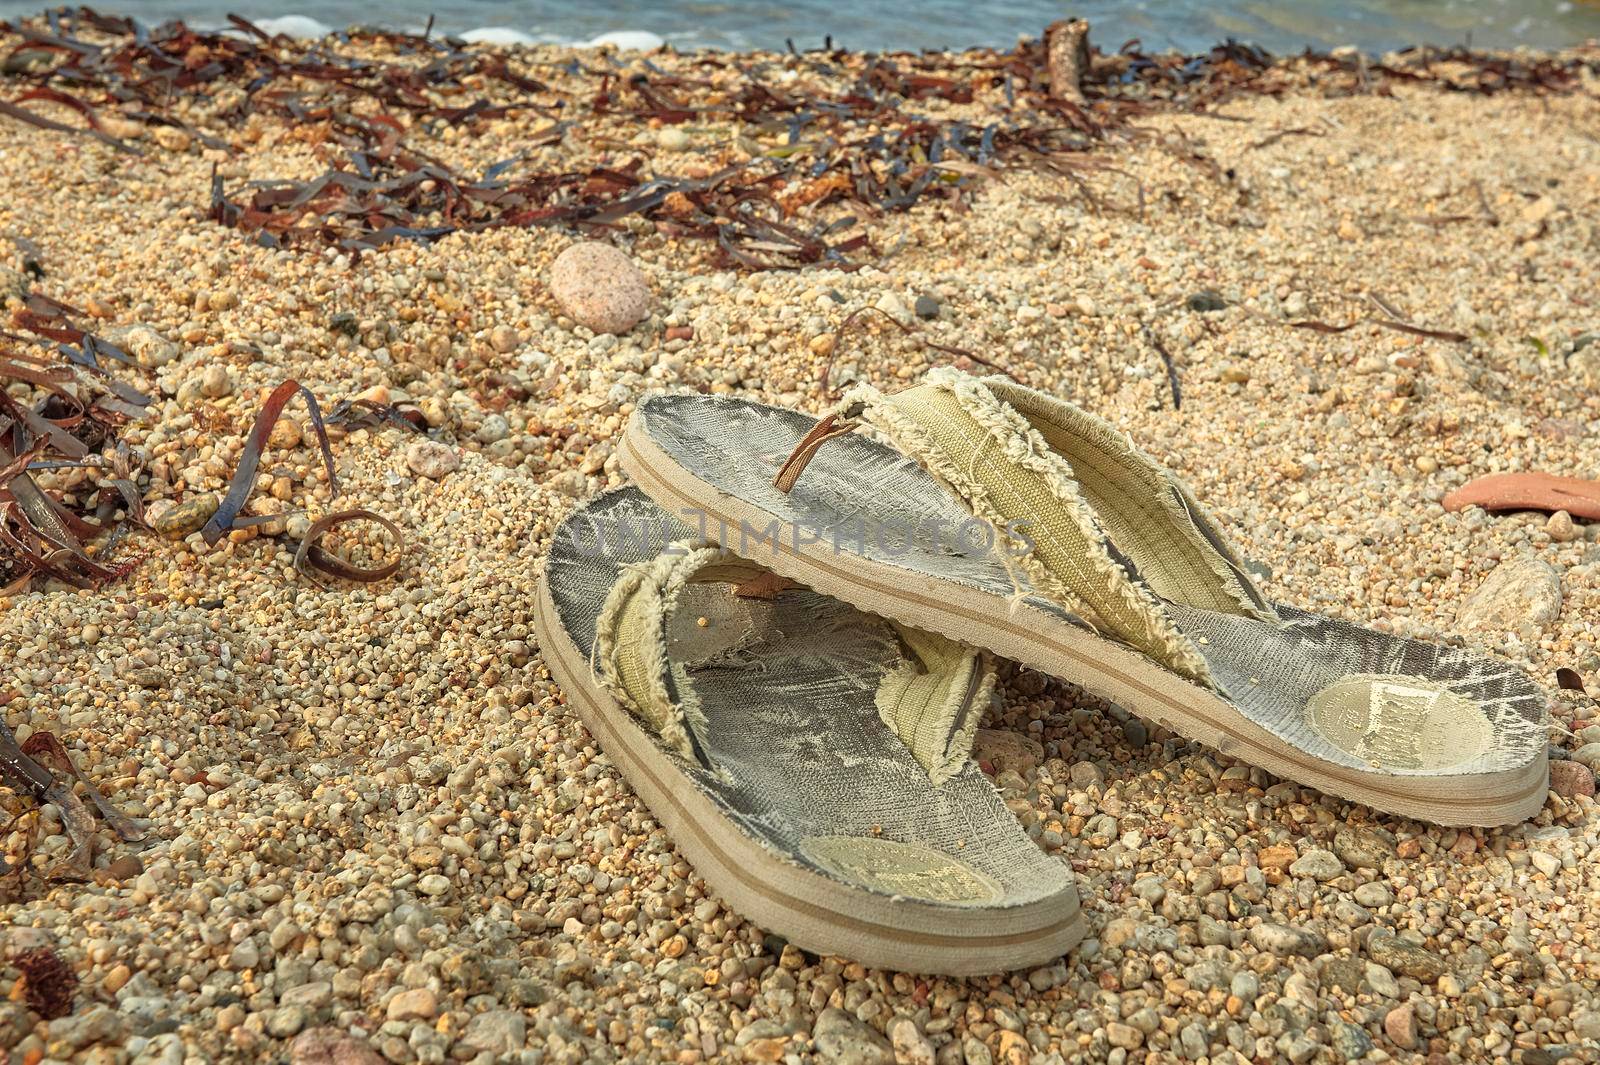 The flip-flops abandoned on the beach. by pippocarlot